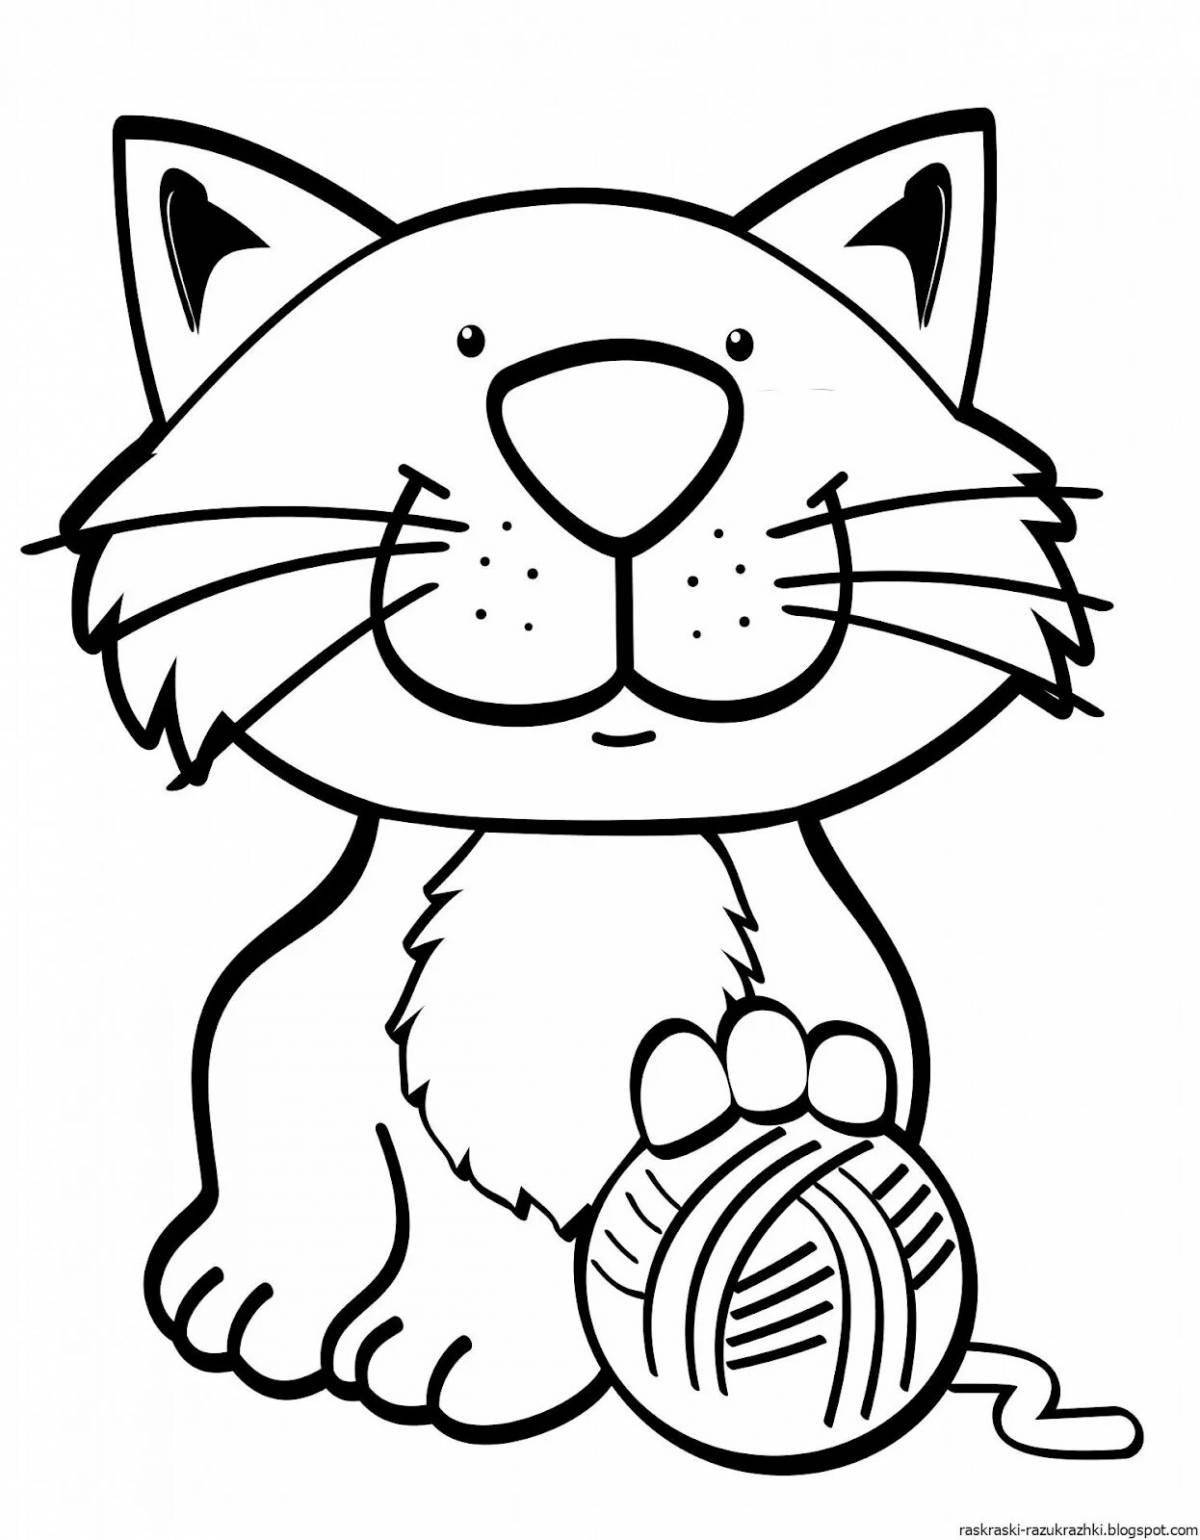 Witty kitty coloring book for kids